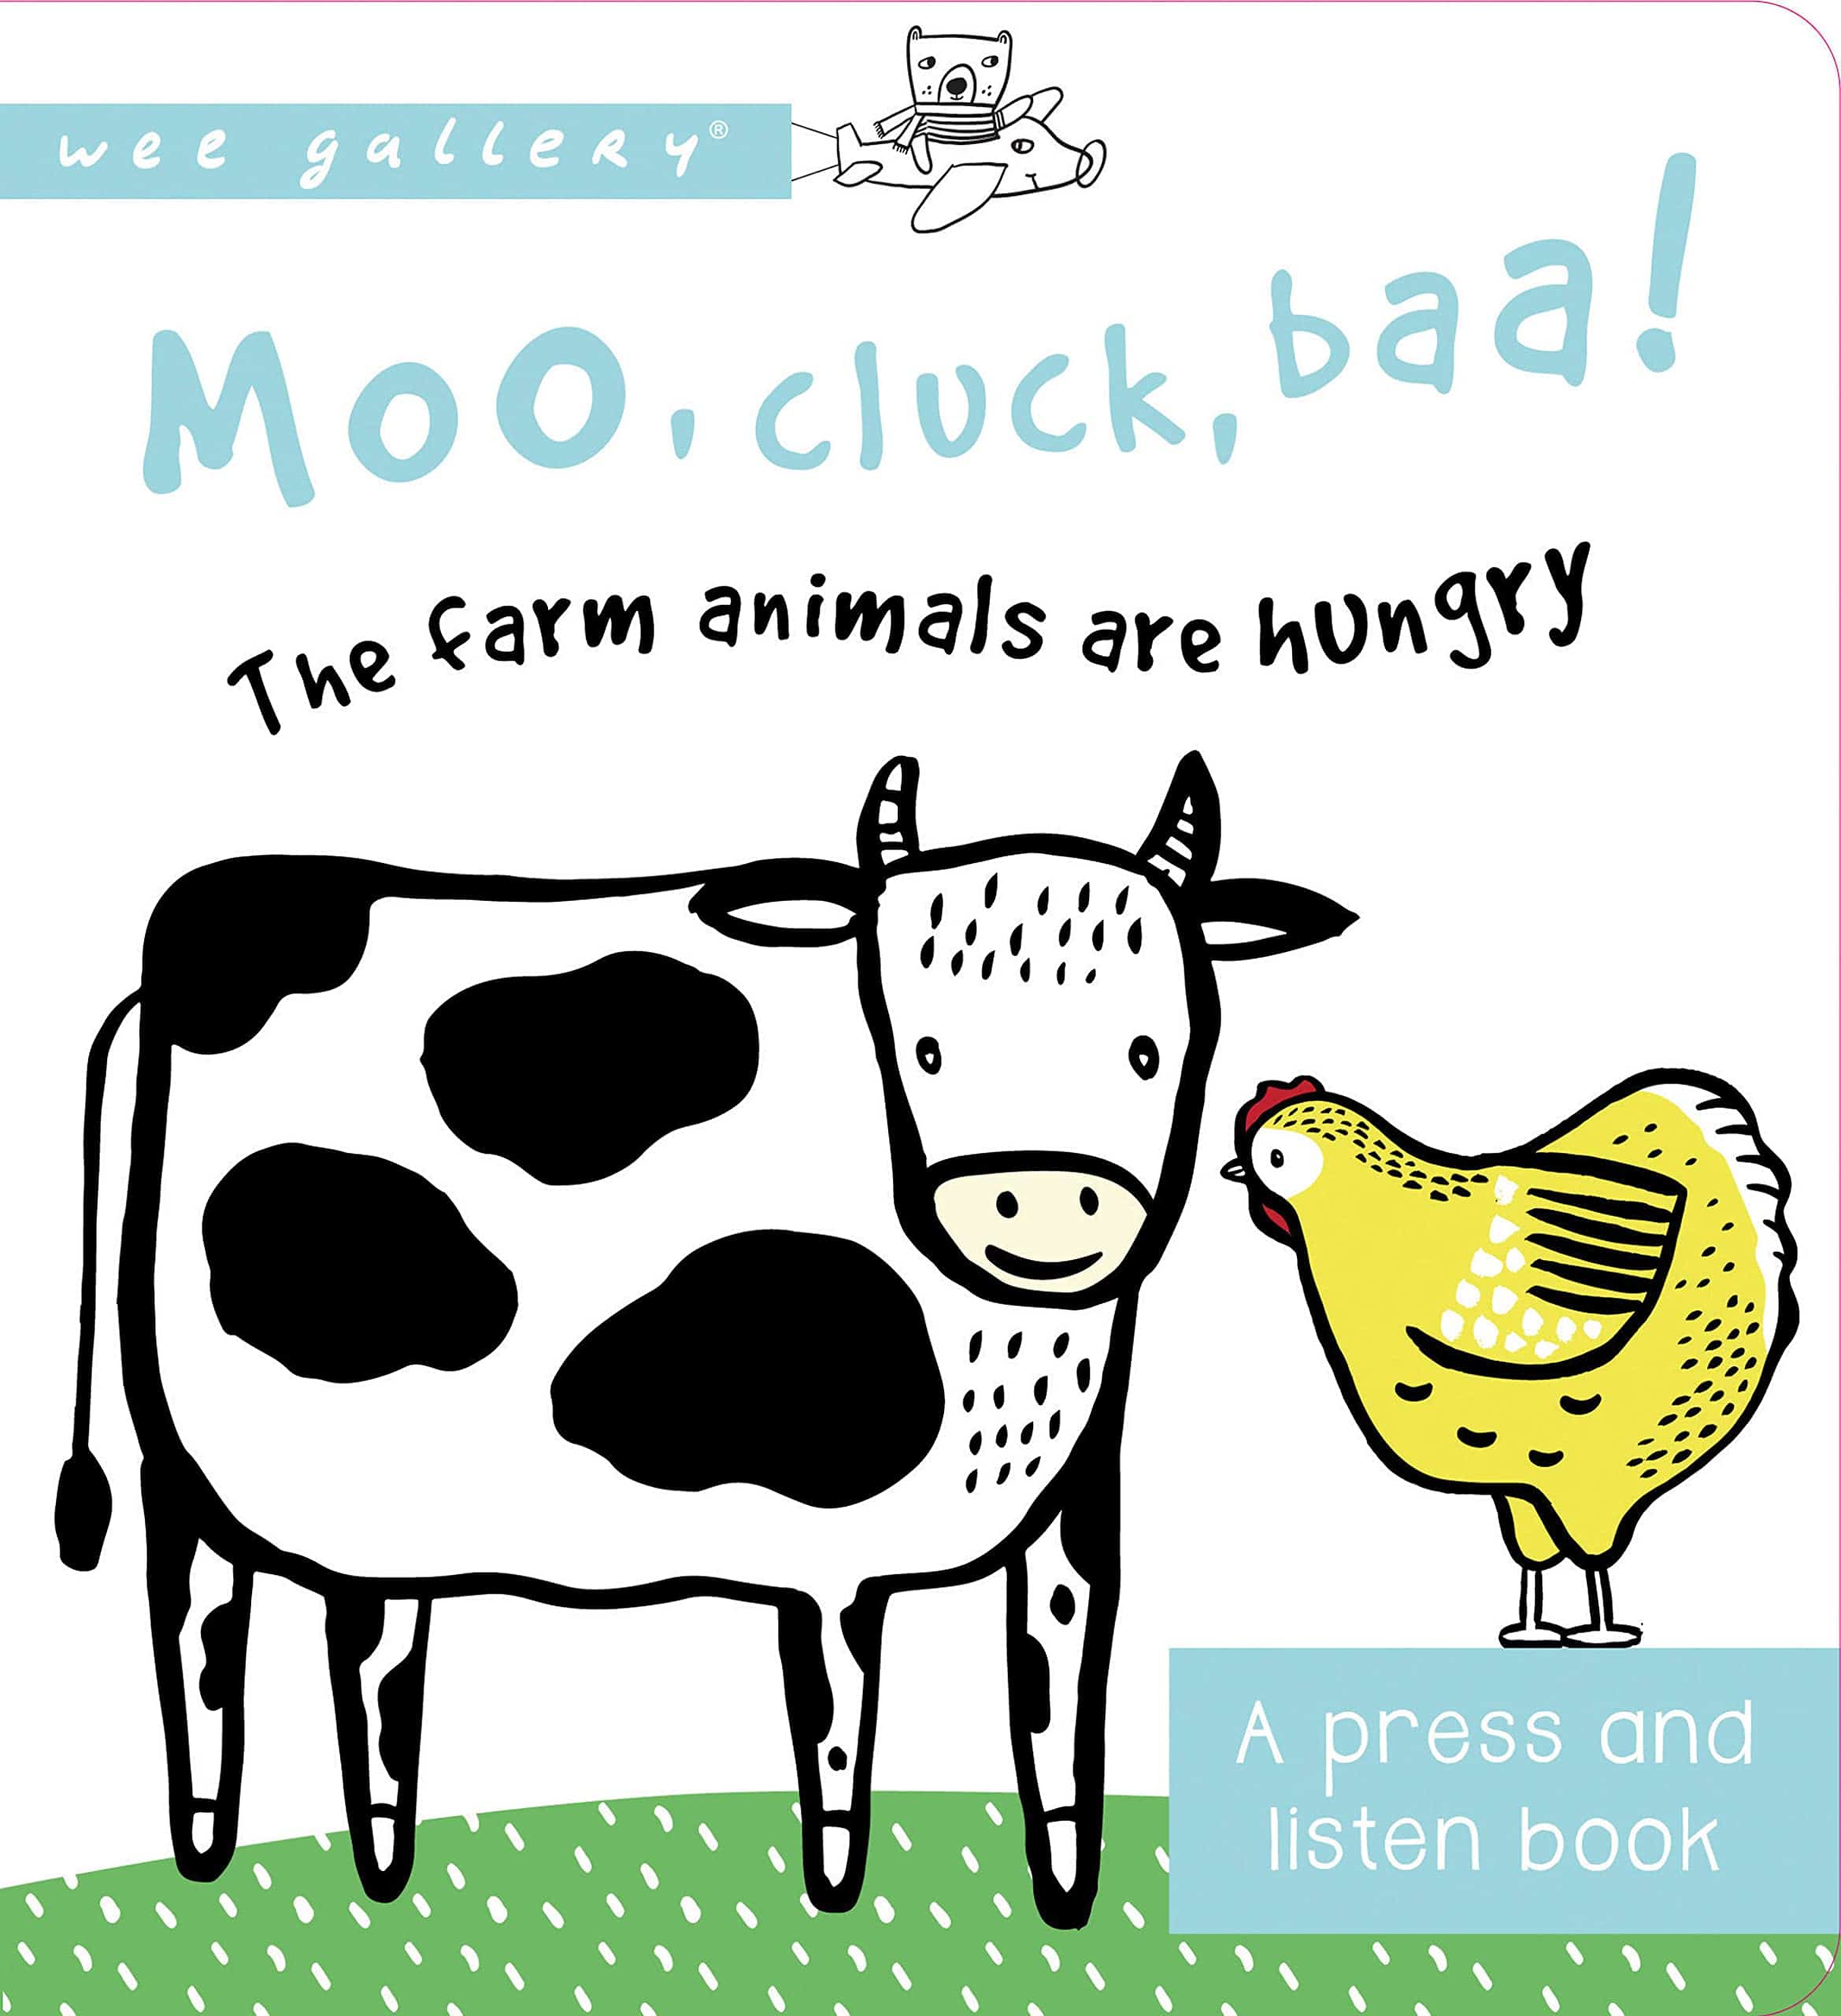 Farm　–　Hungry:　and　Gifts　Moo,　Sound　Press　Listen　are　Baa!　Cluck,　Animals　The　A　Marissa's　Books